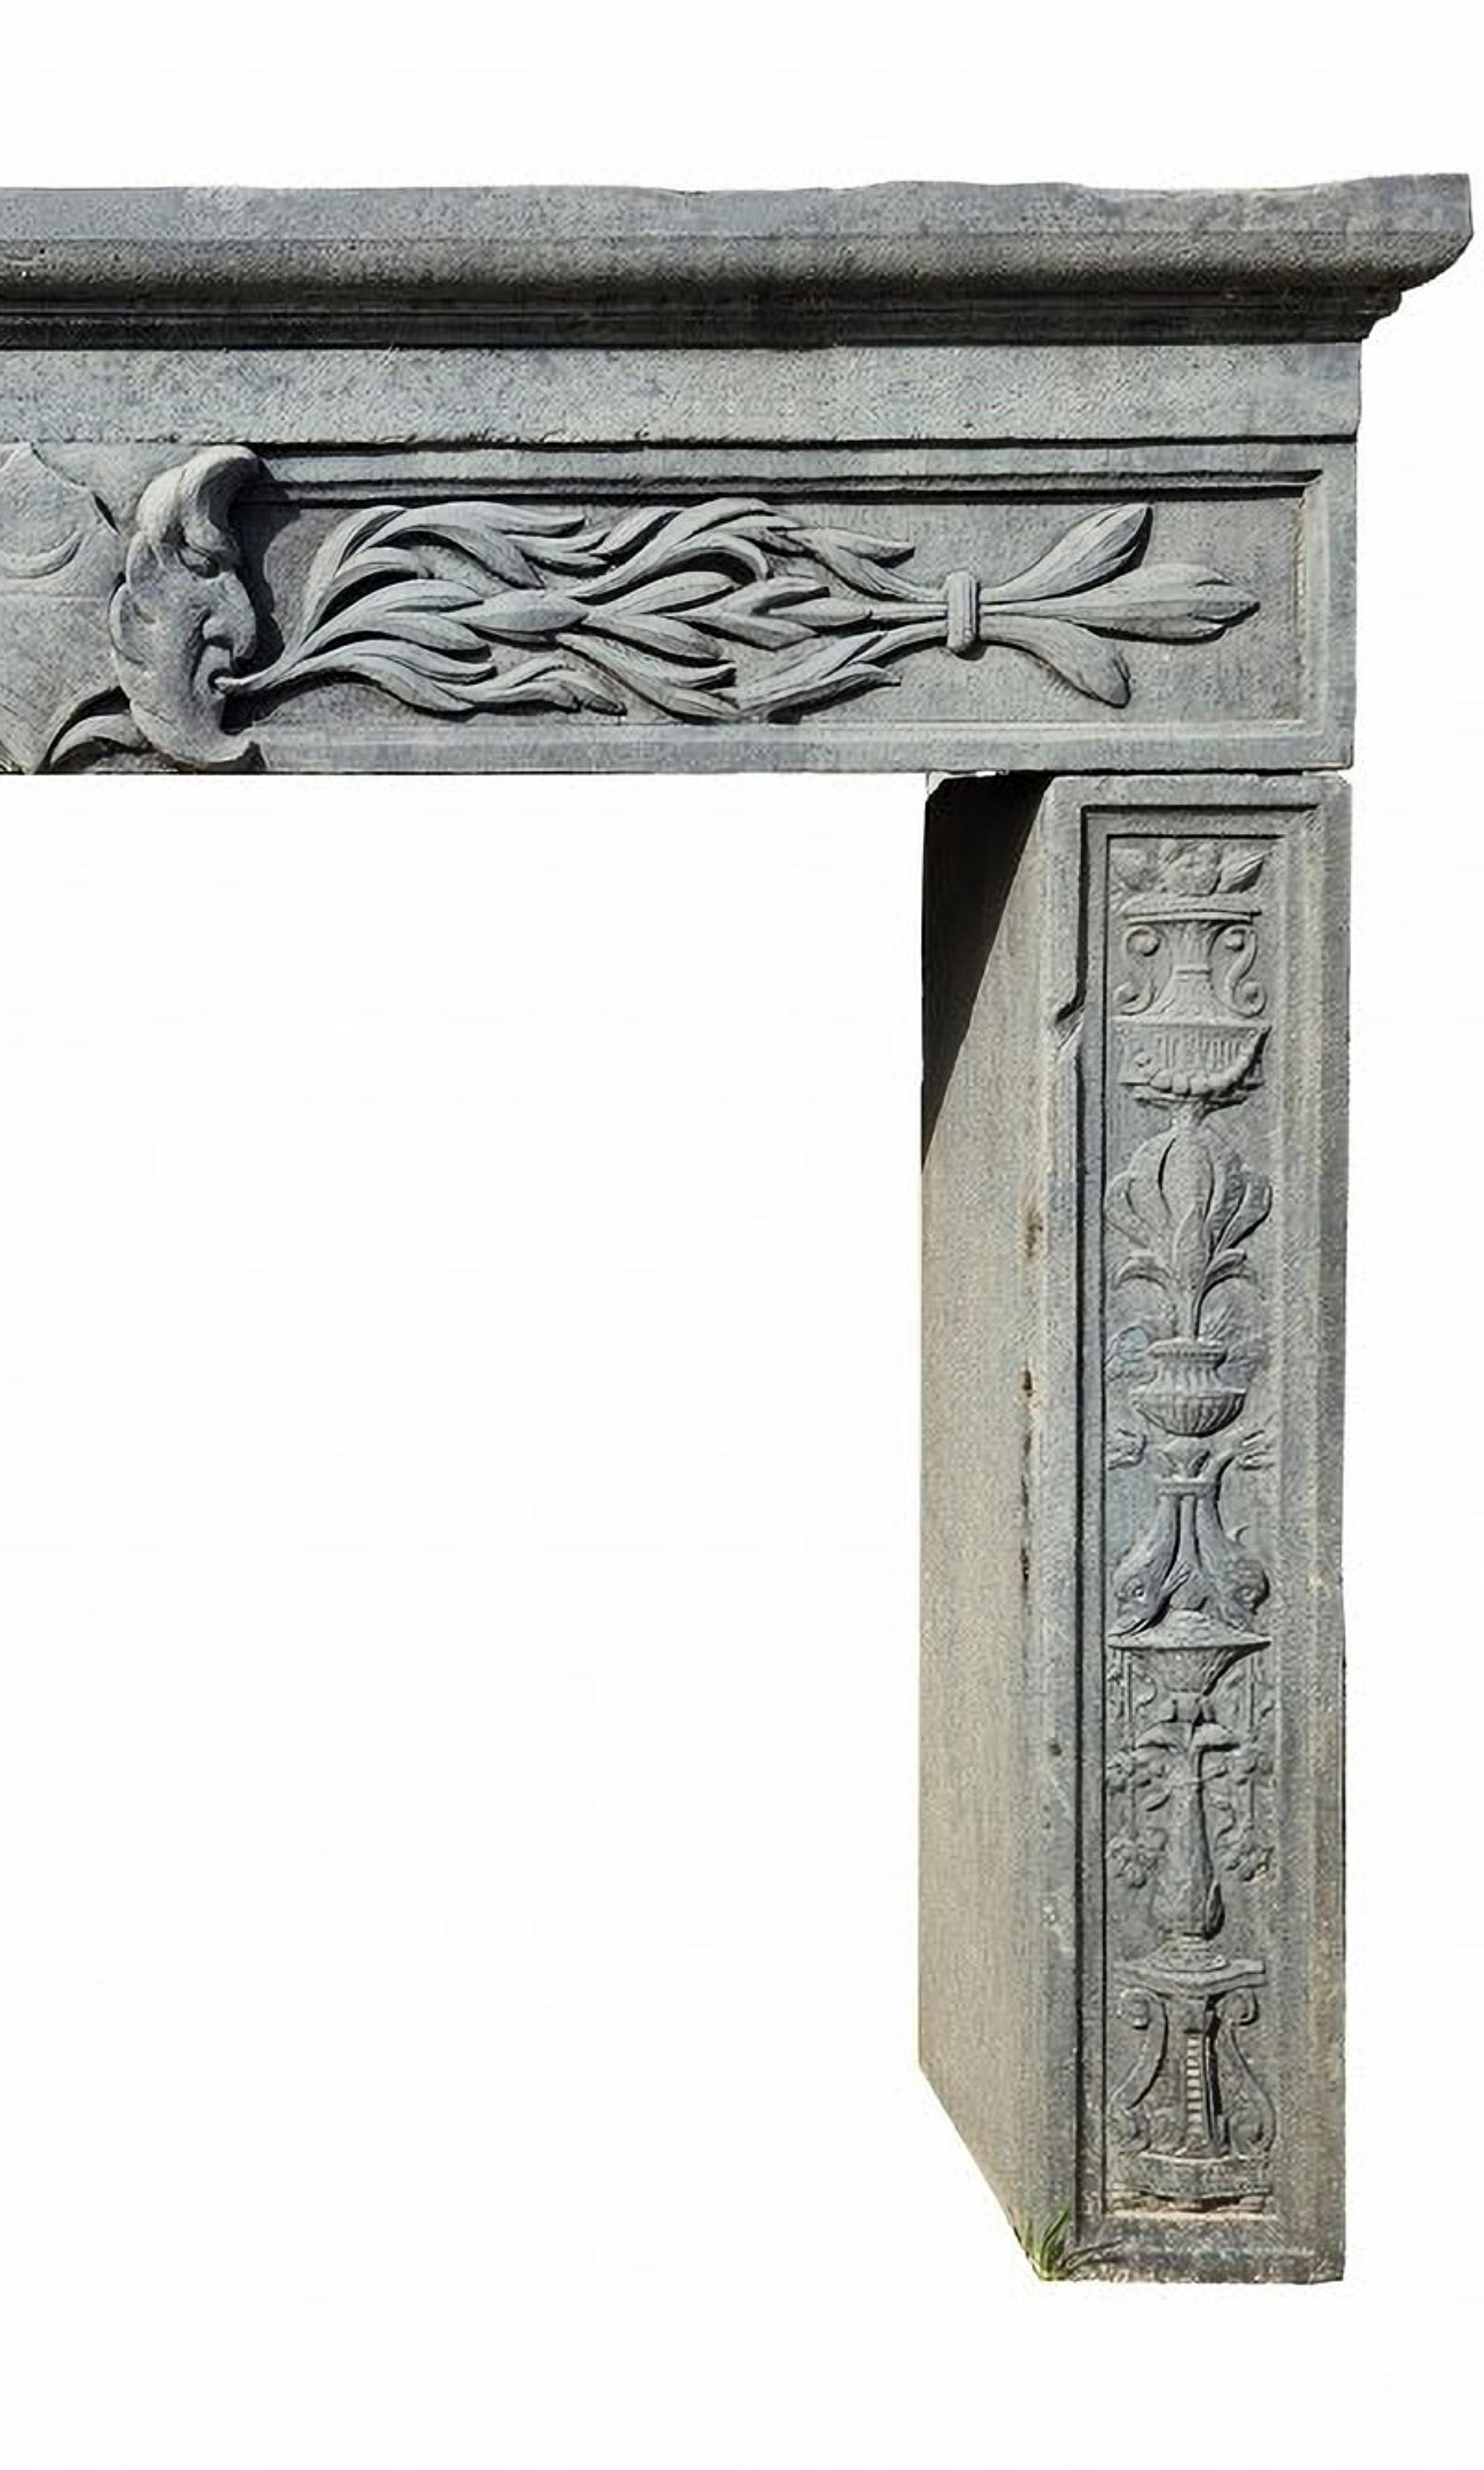 ANTIQUE TUSCAN PIETRA SERENA FIREPLACE
20th Century
Large gray sandstone fireplace. In the center two opposing satyrs protecting a noble coat of arms with a half moon collapsed in the upper half and with oblique bands in the lower half. From the